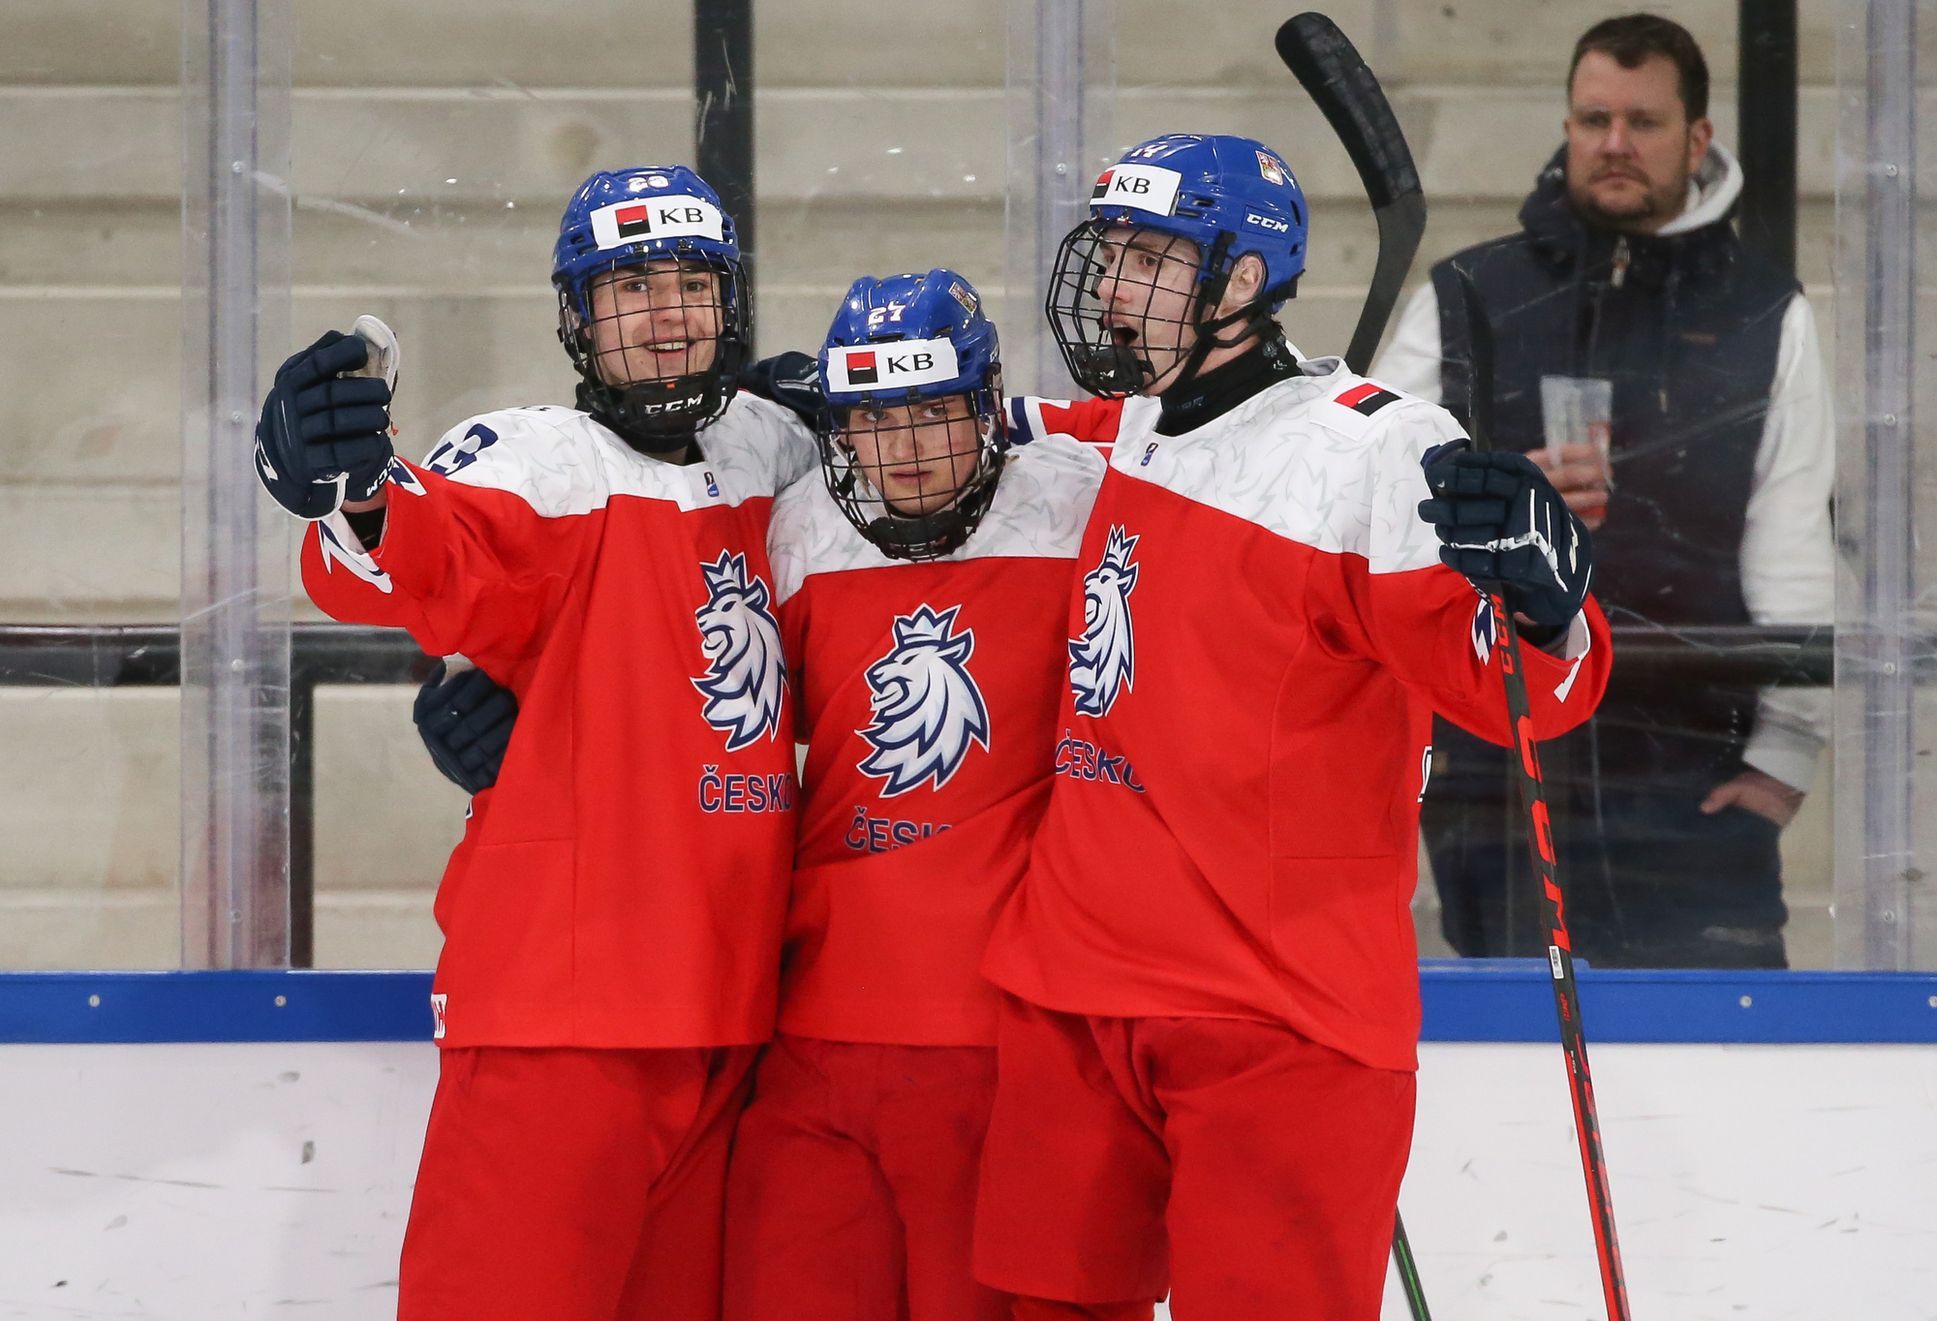 The Czech hockey players secure spot in Hlinka Gretzky Cup final with 8-2 victory over Finland